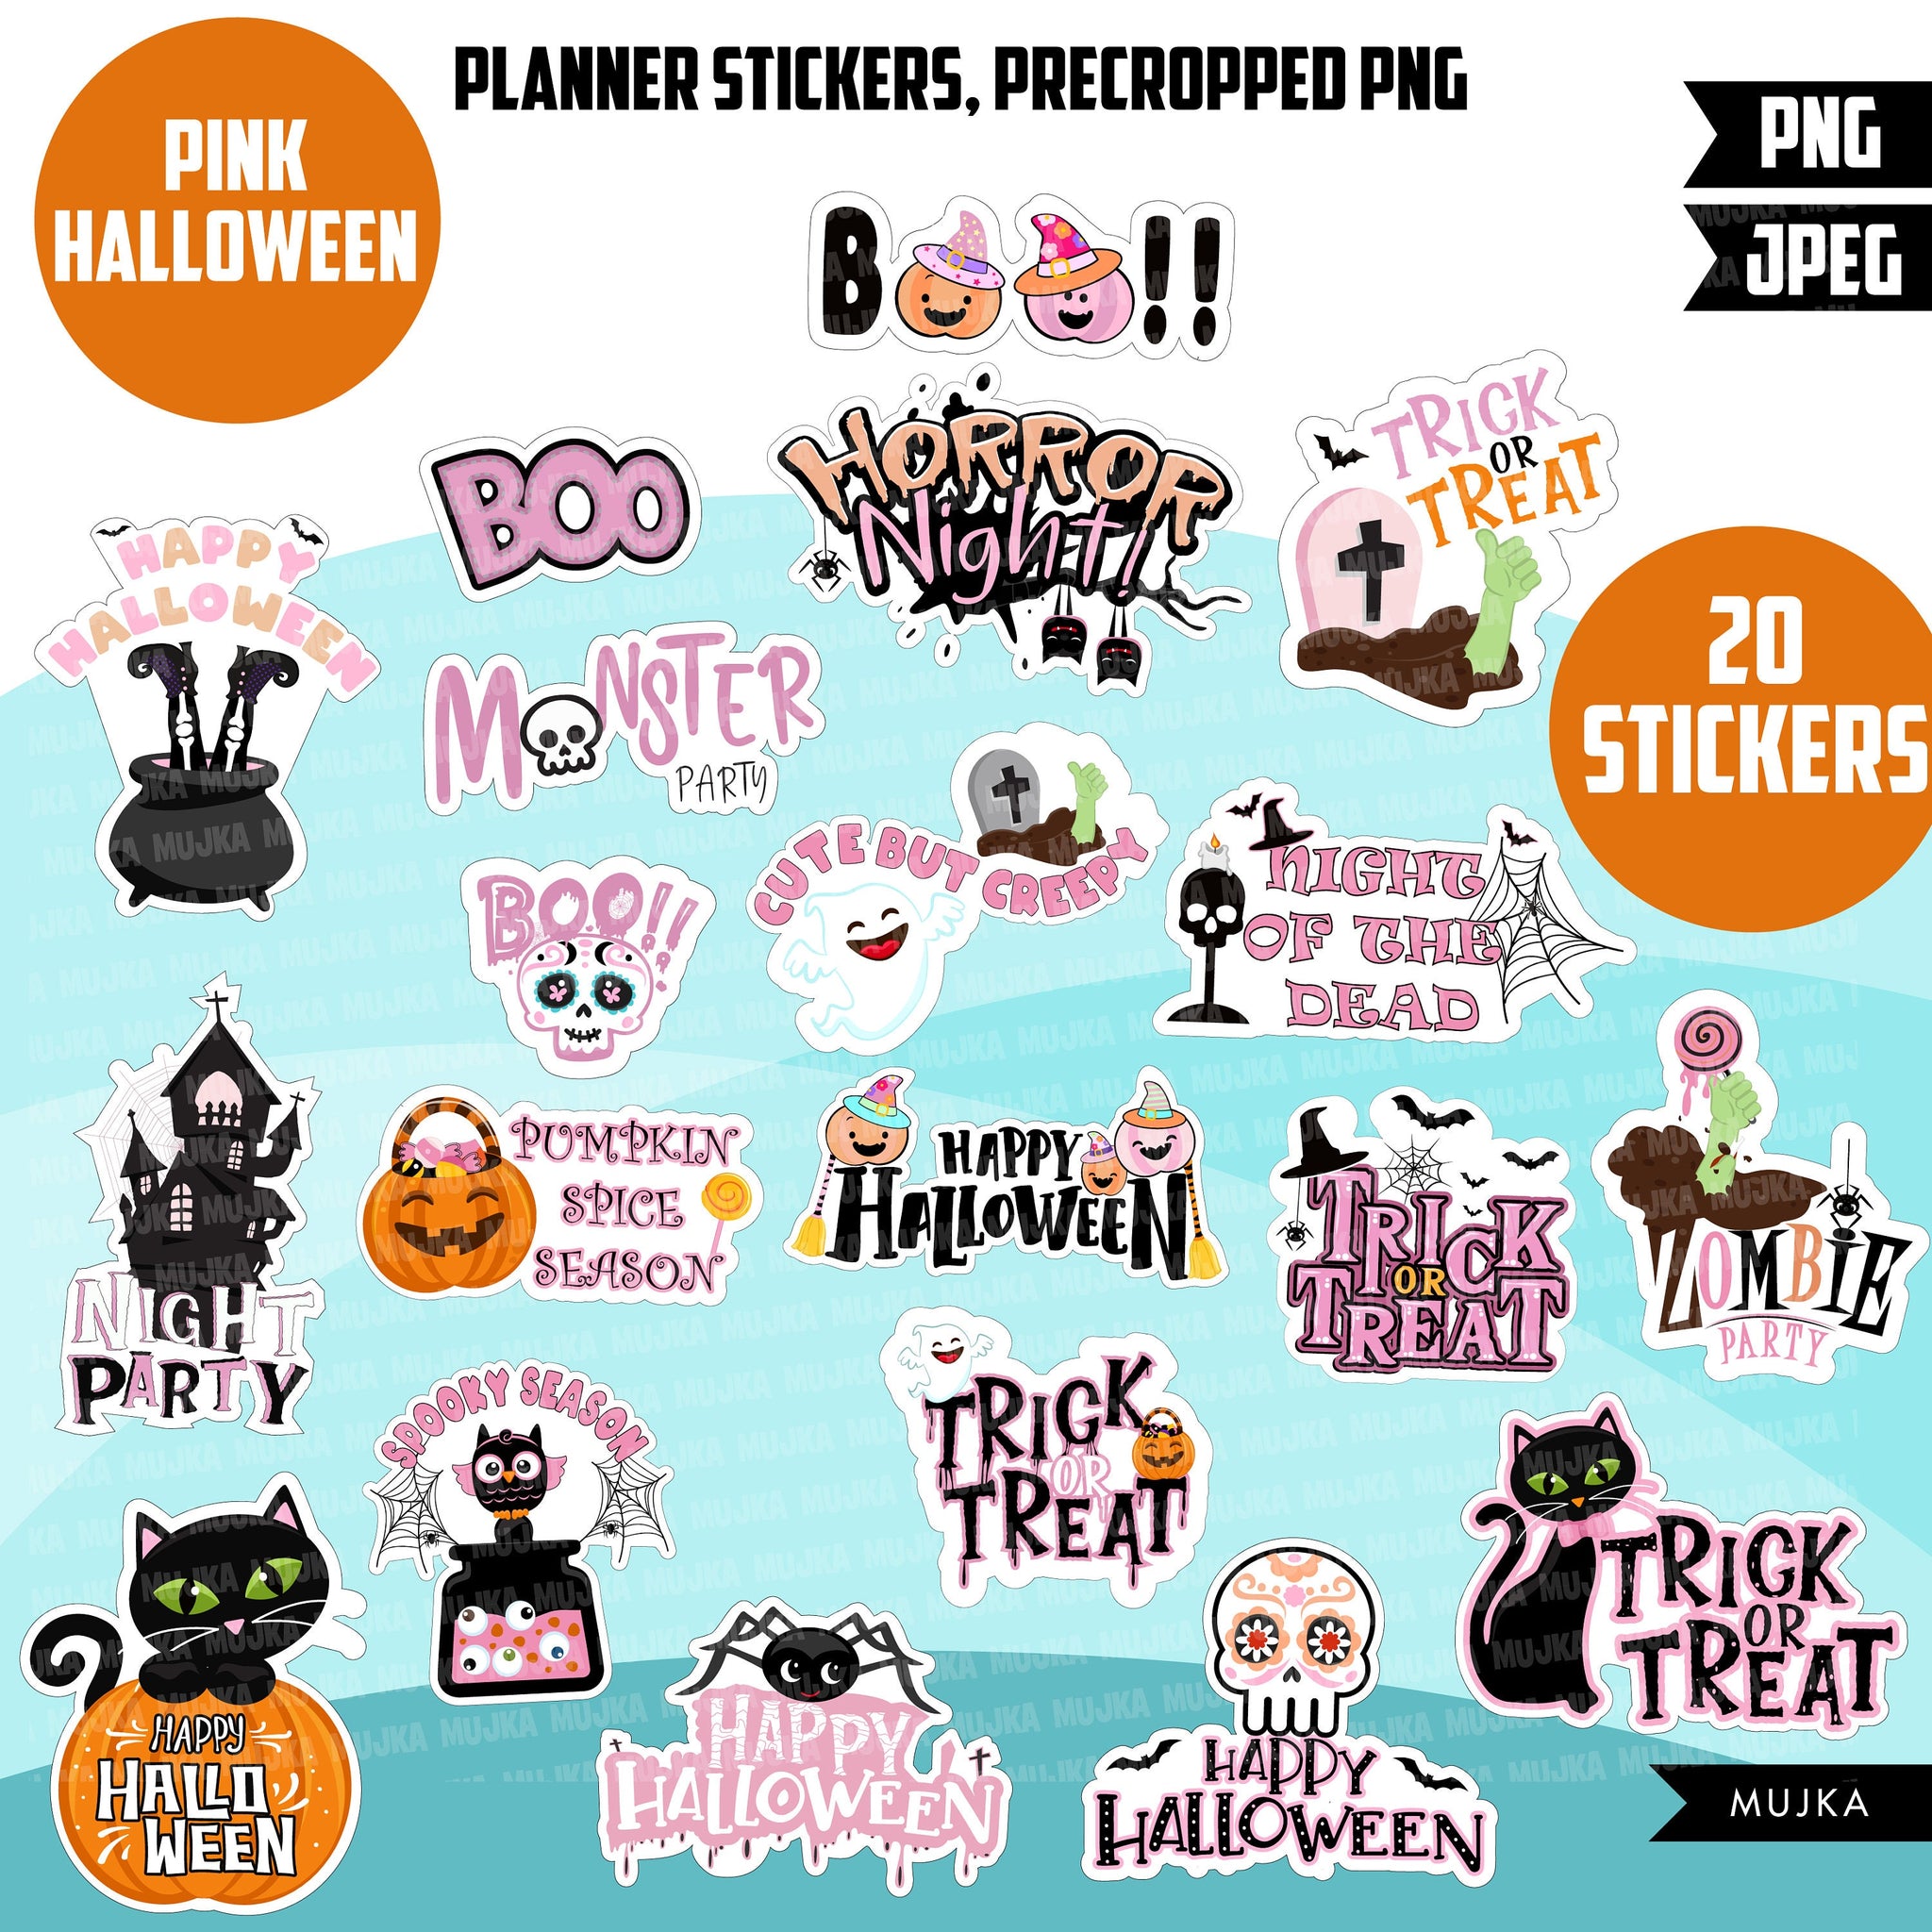 Paper House Productions - Planner Stickers - Sugary Gal II